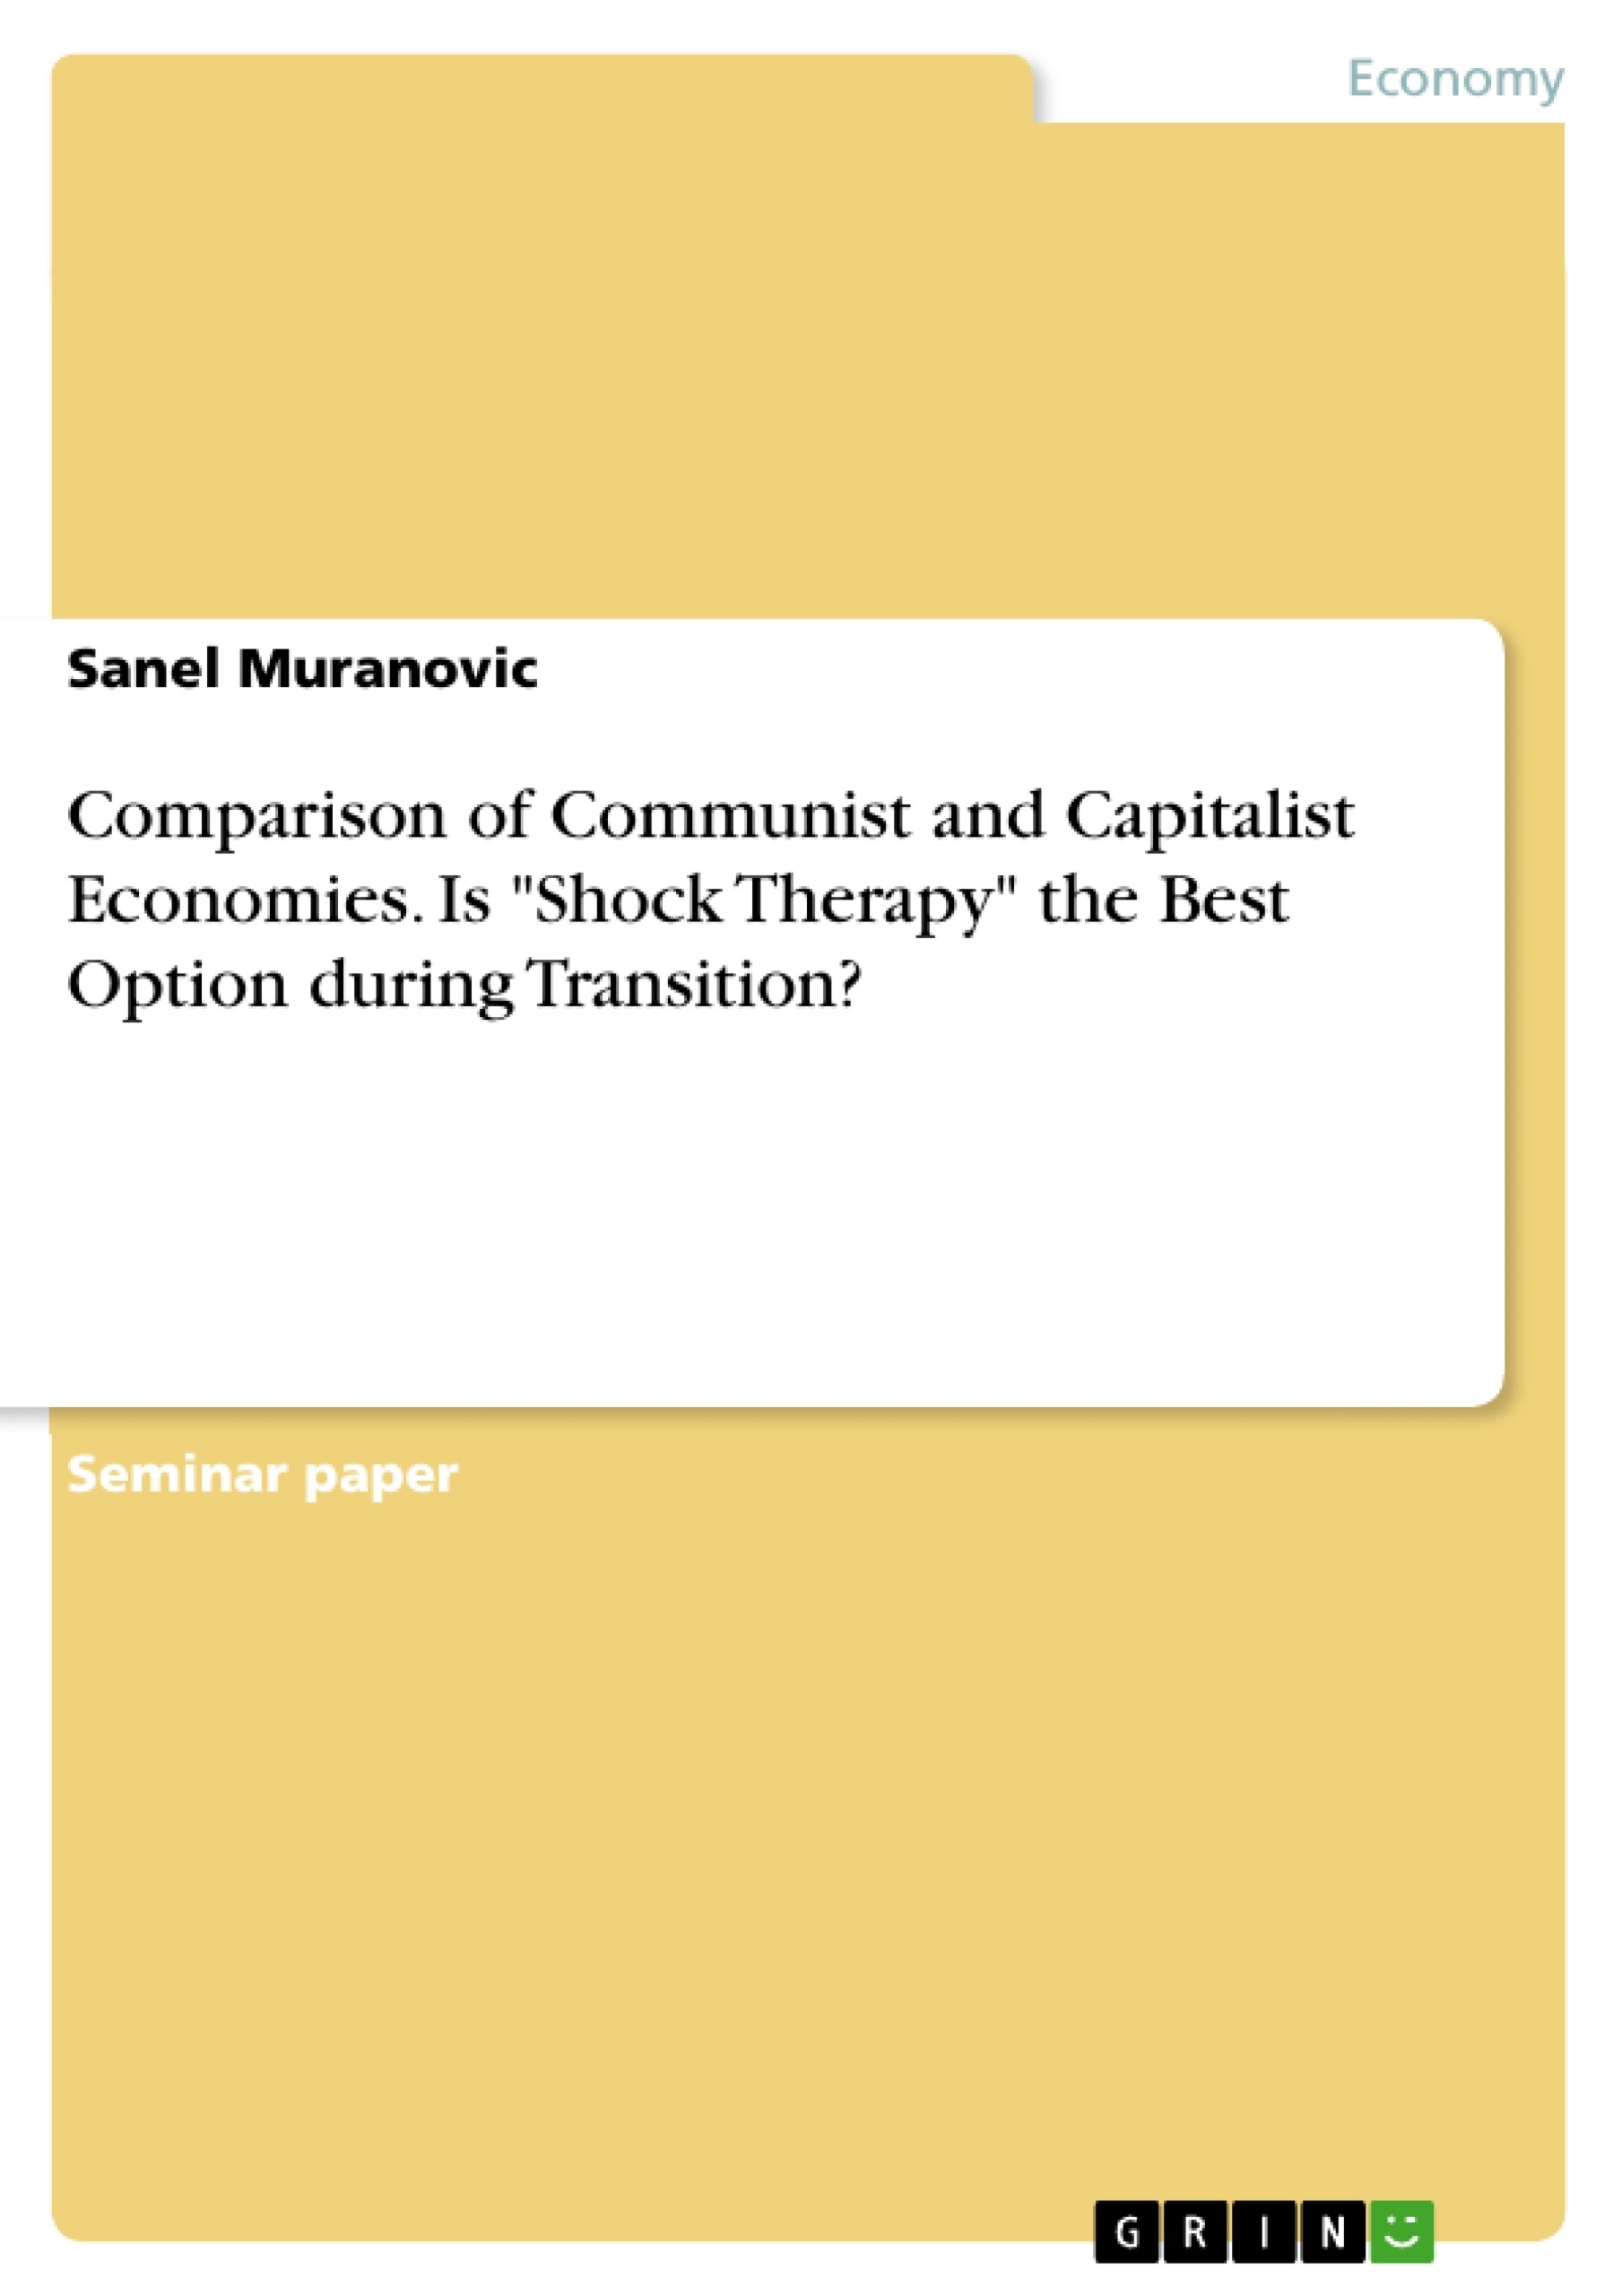 Titre: Comparison of Communist and Capitalist Economies. Is "Shock Therapy" the Best Option during Transition?